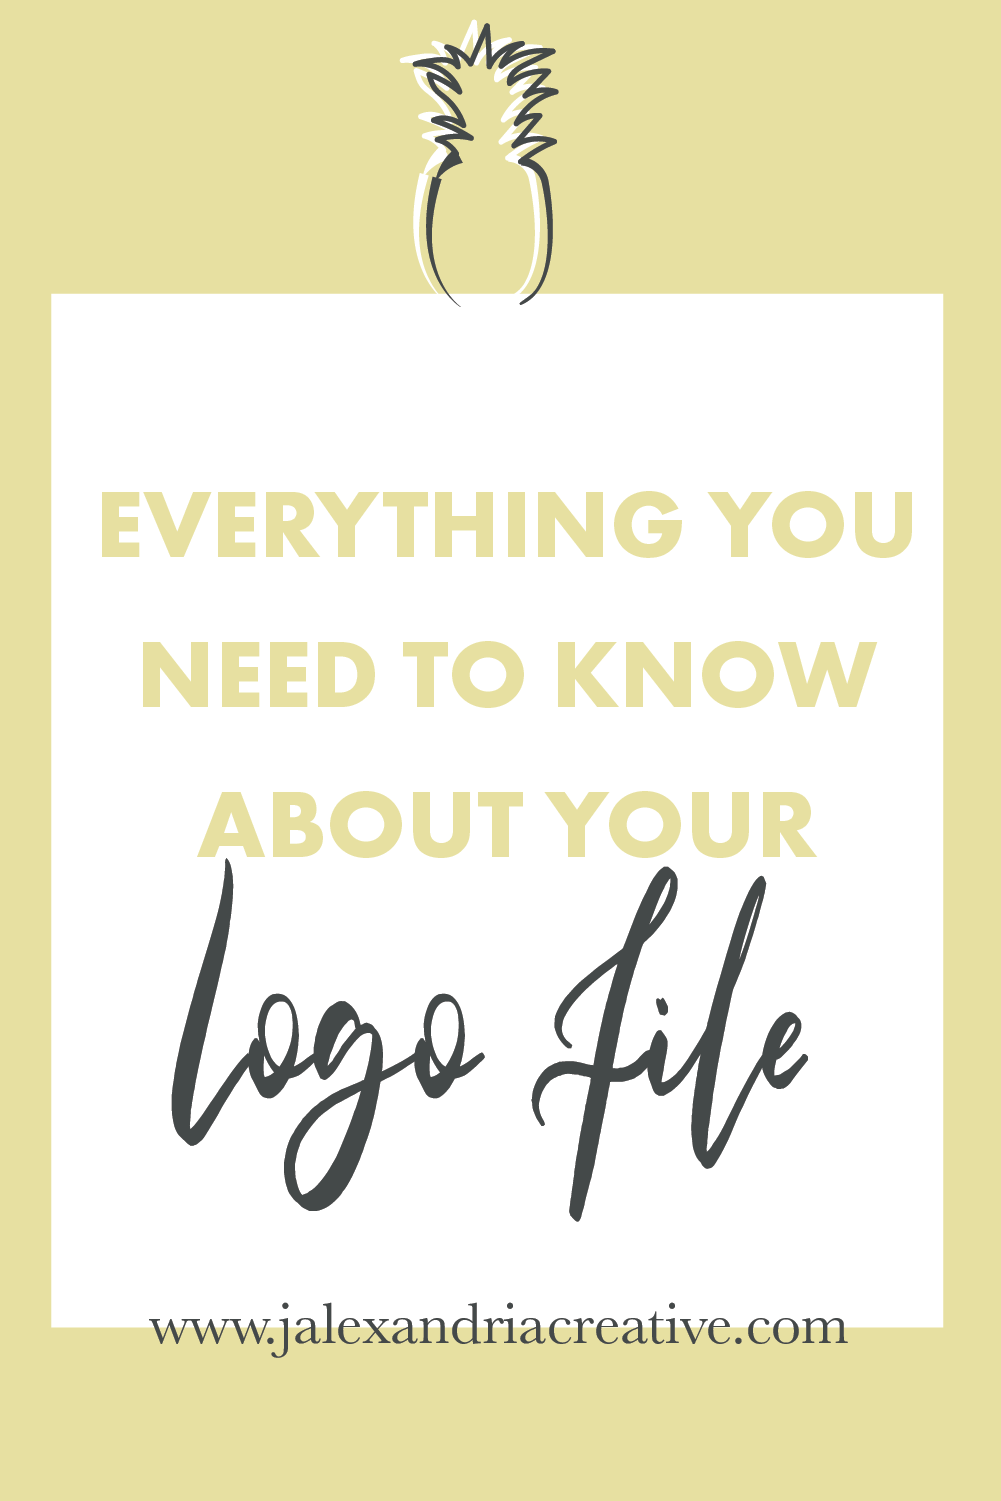 Everything you need to know about your logo file | J. Alexandria Creative